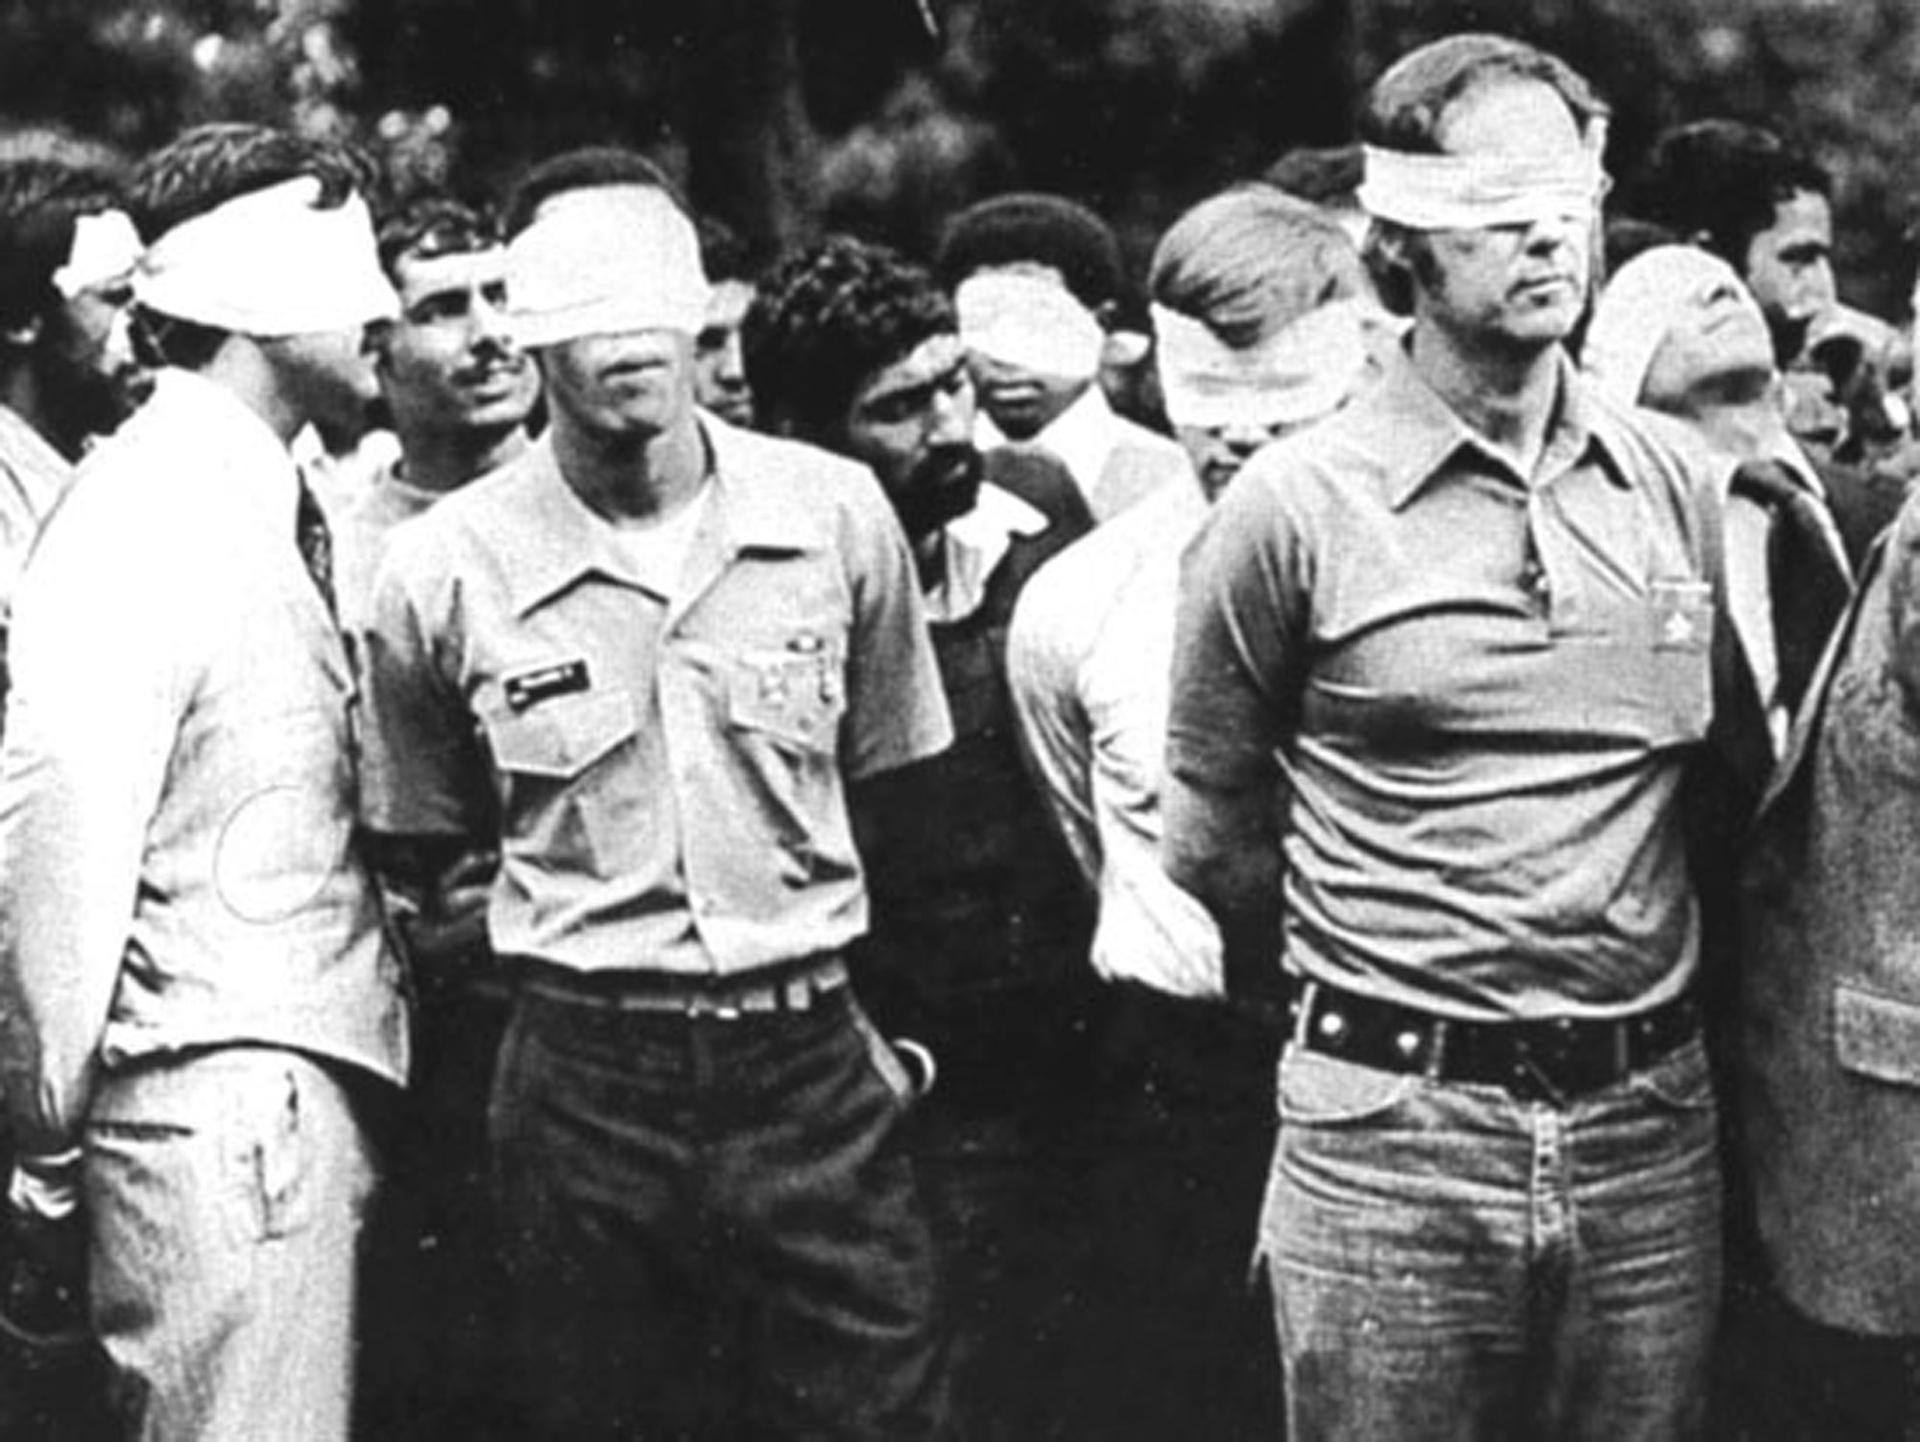 Blindfolded US hostages and their Iranian captors outside the US Embassy in Tehran, Iran, 1979.